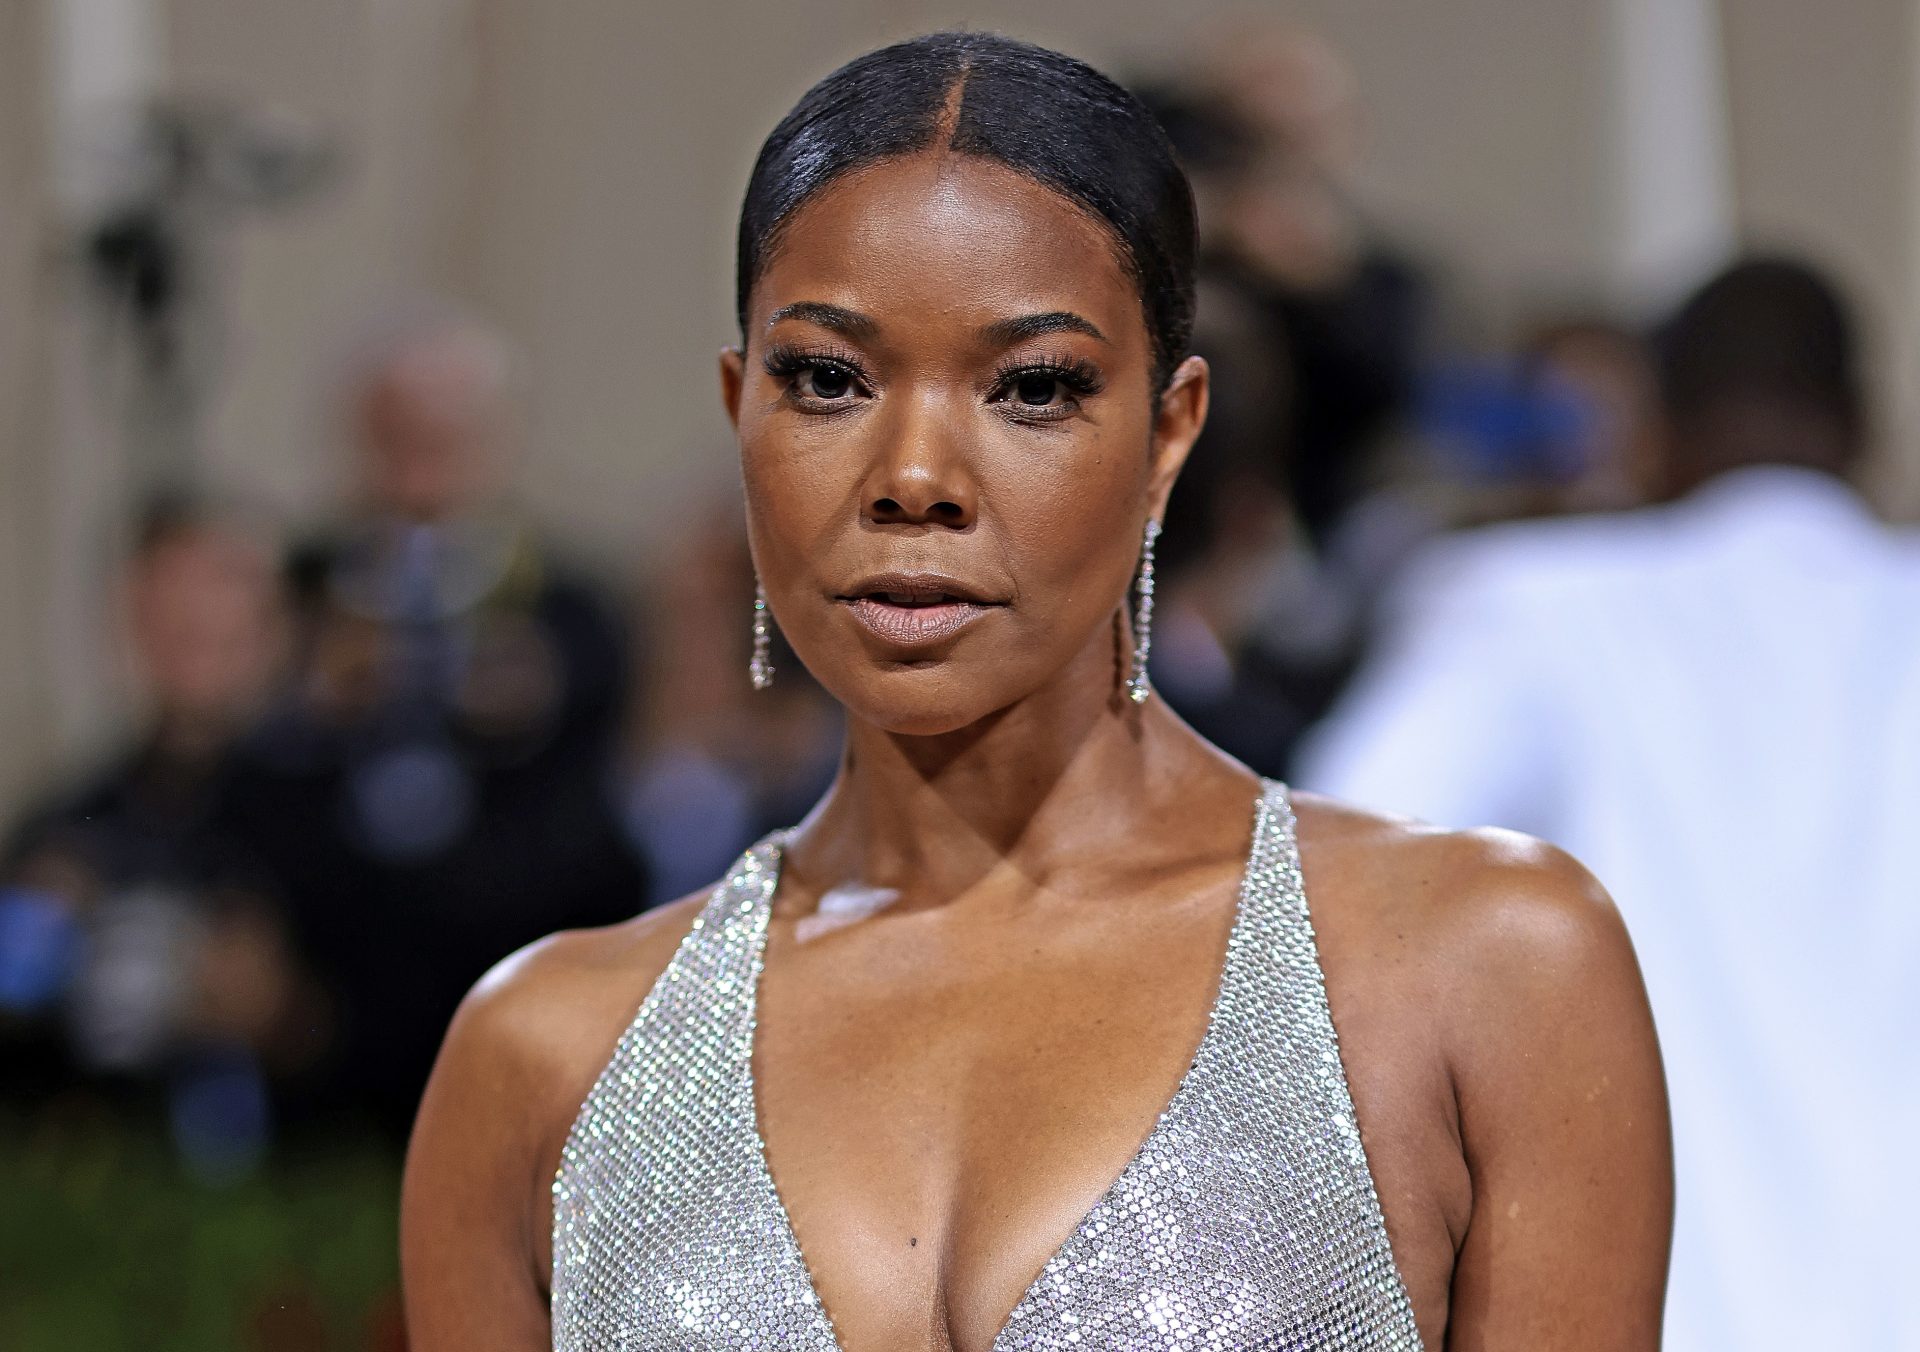 Gabrielle Union Says She's Been Suffering From PTSD For 30 Years After Being Raped